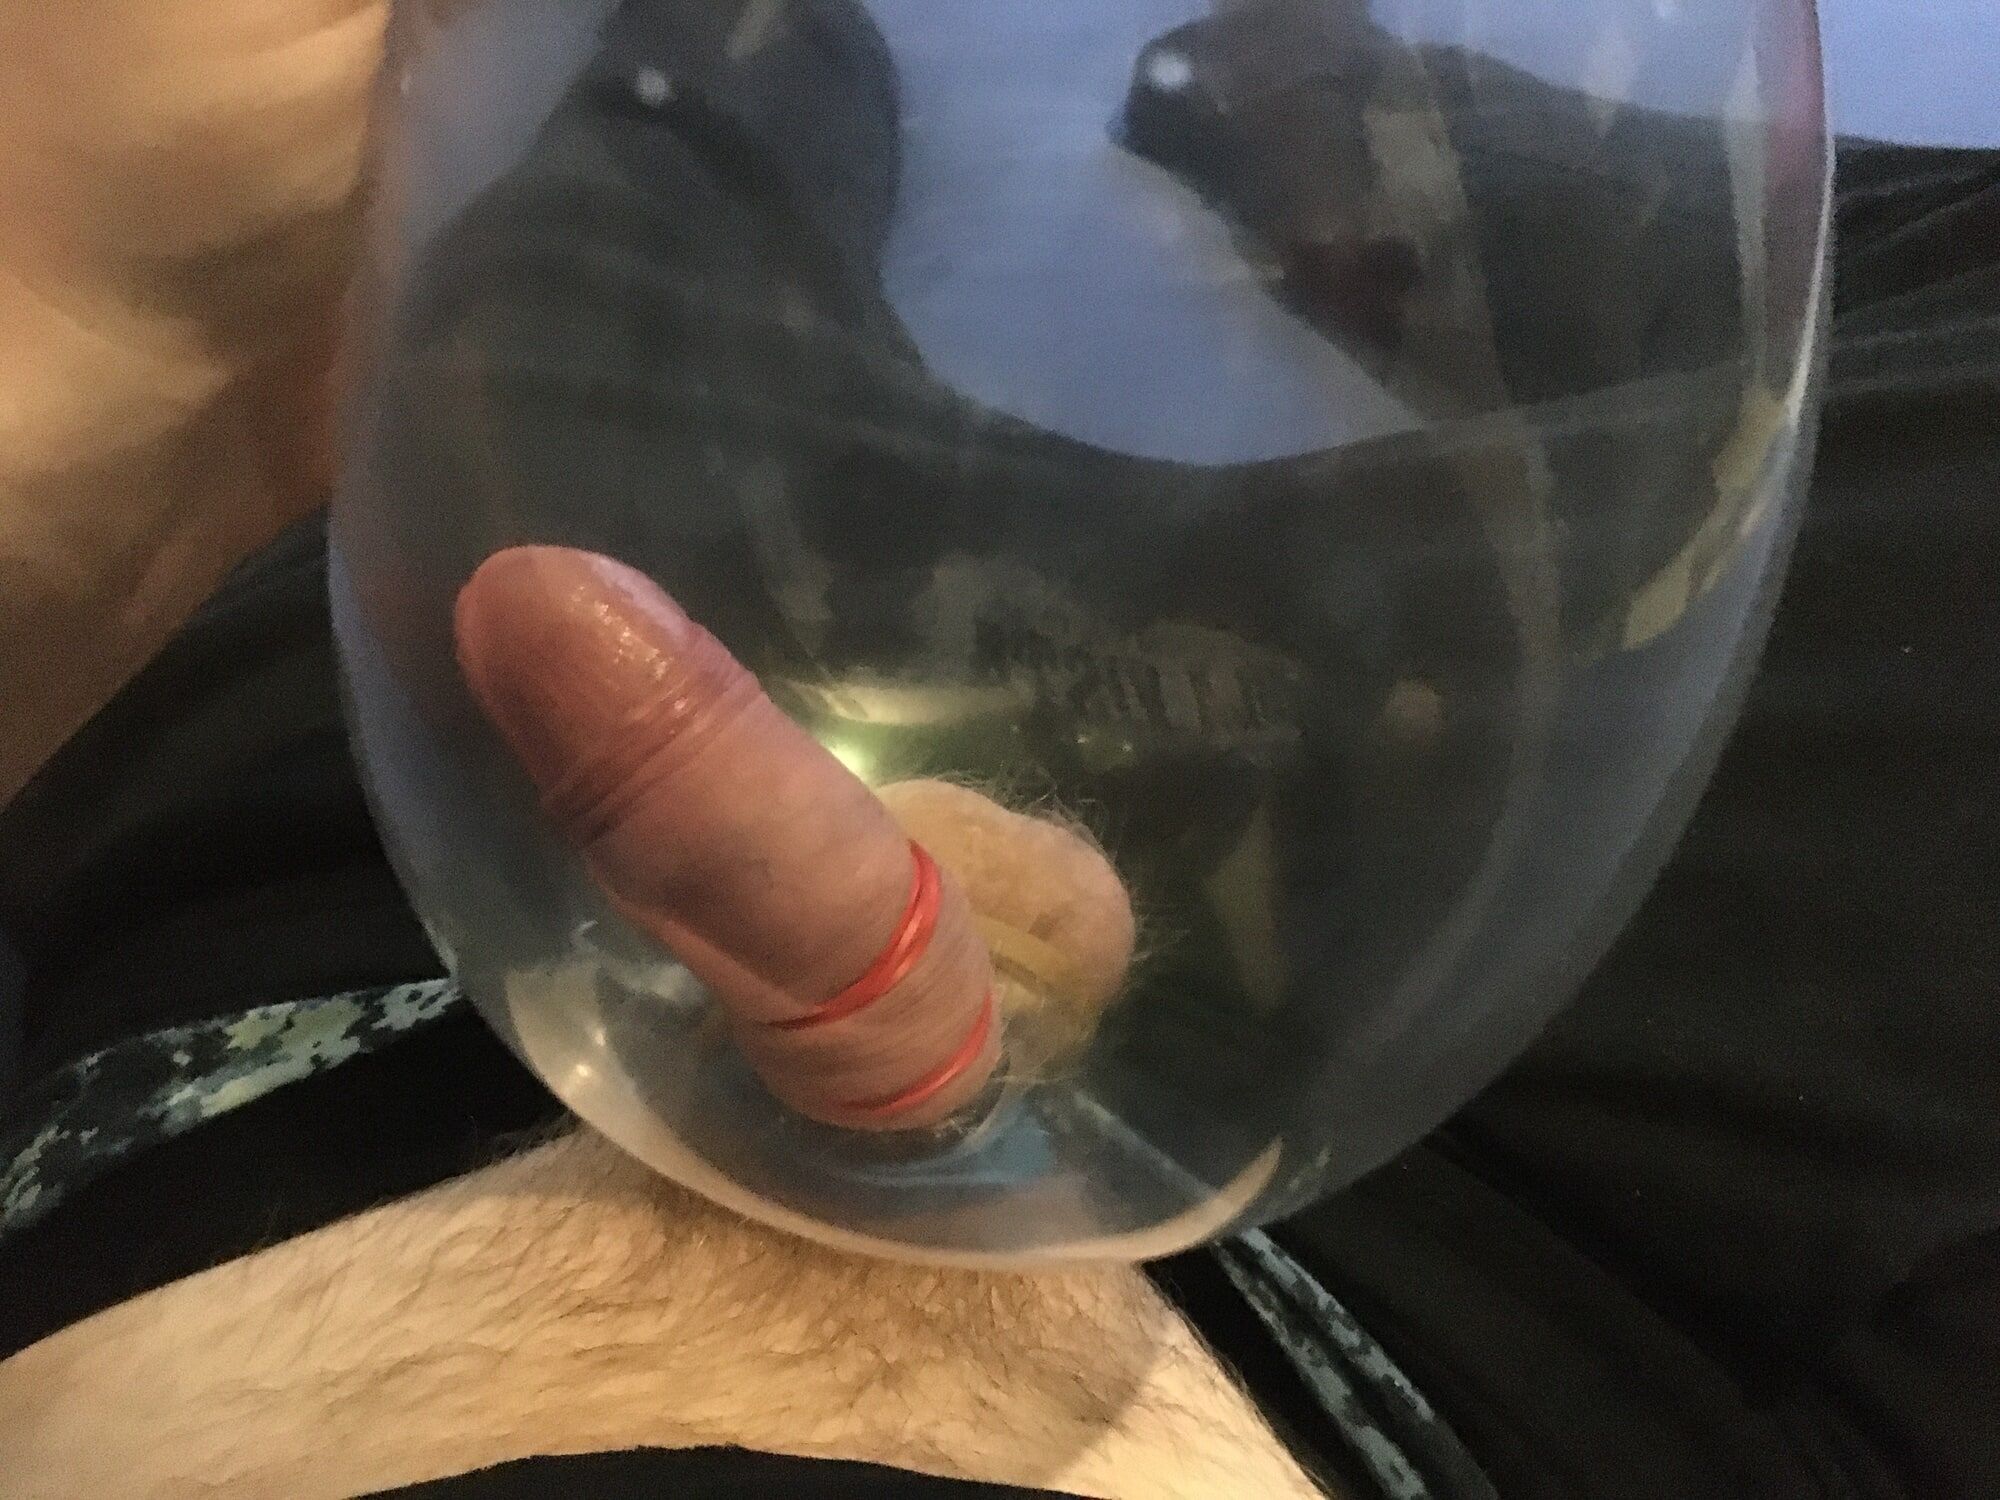  Haired Dick And Balls With Rubber Bands Condom Ballon  fuck #35